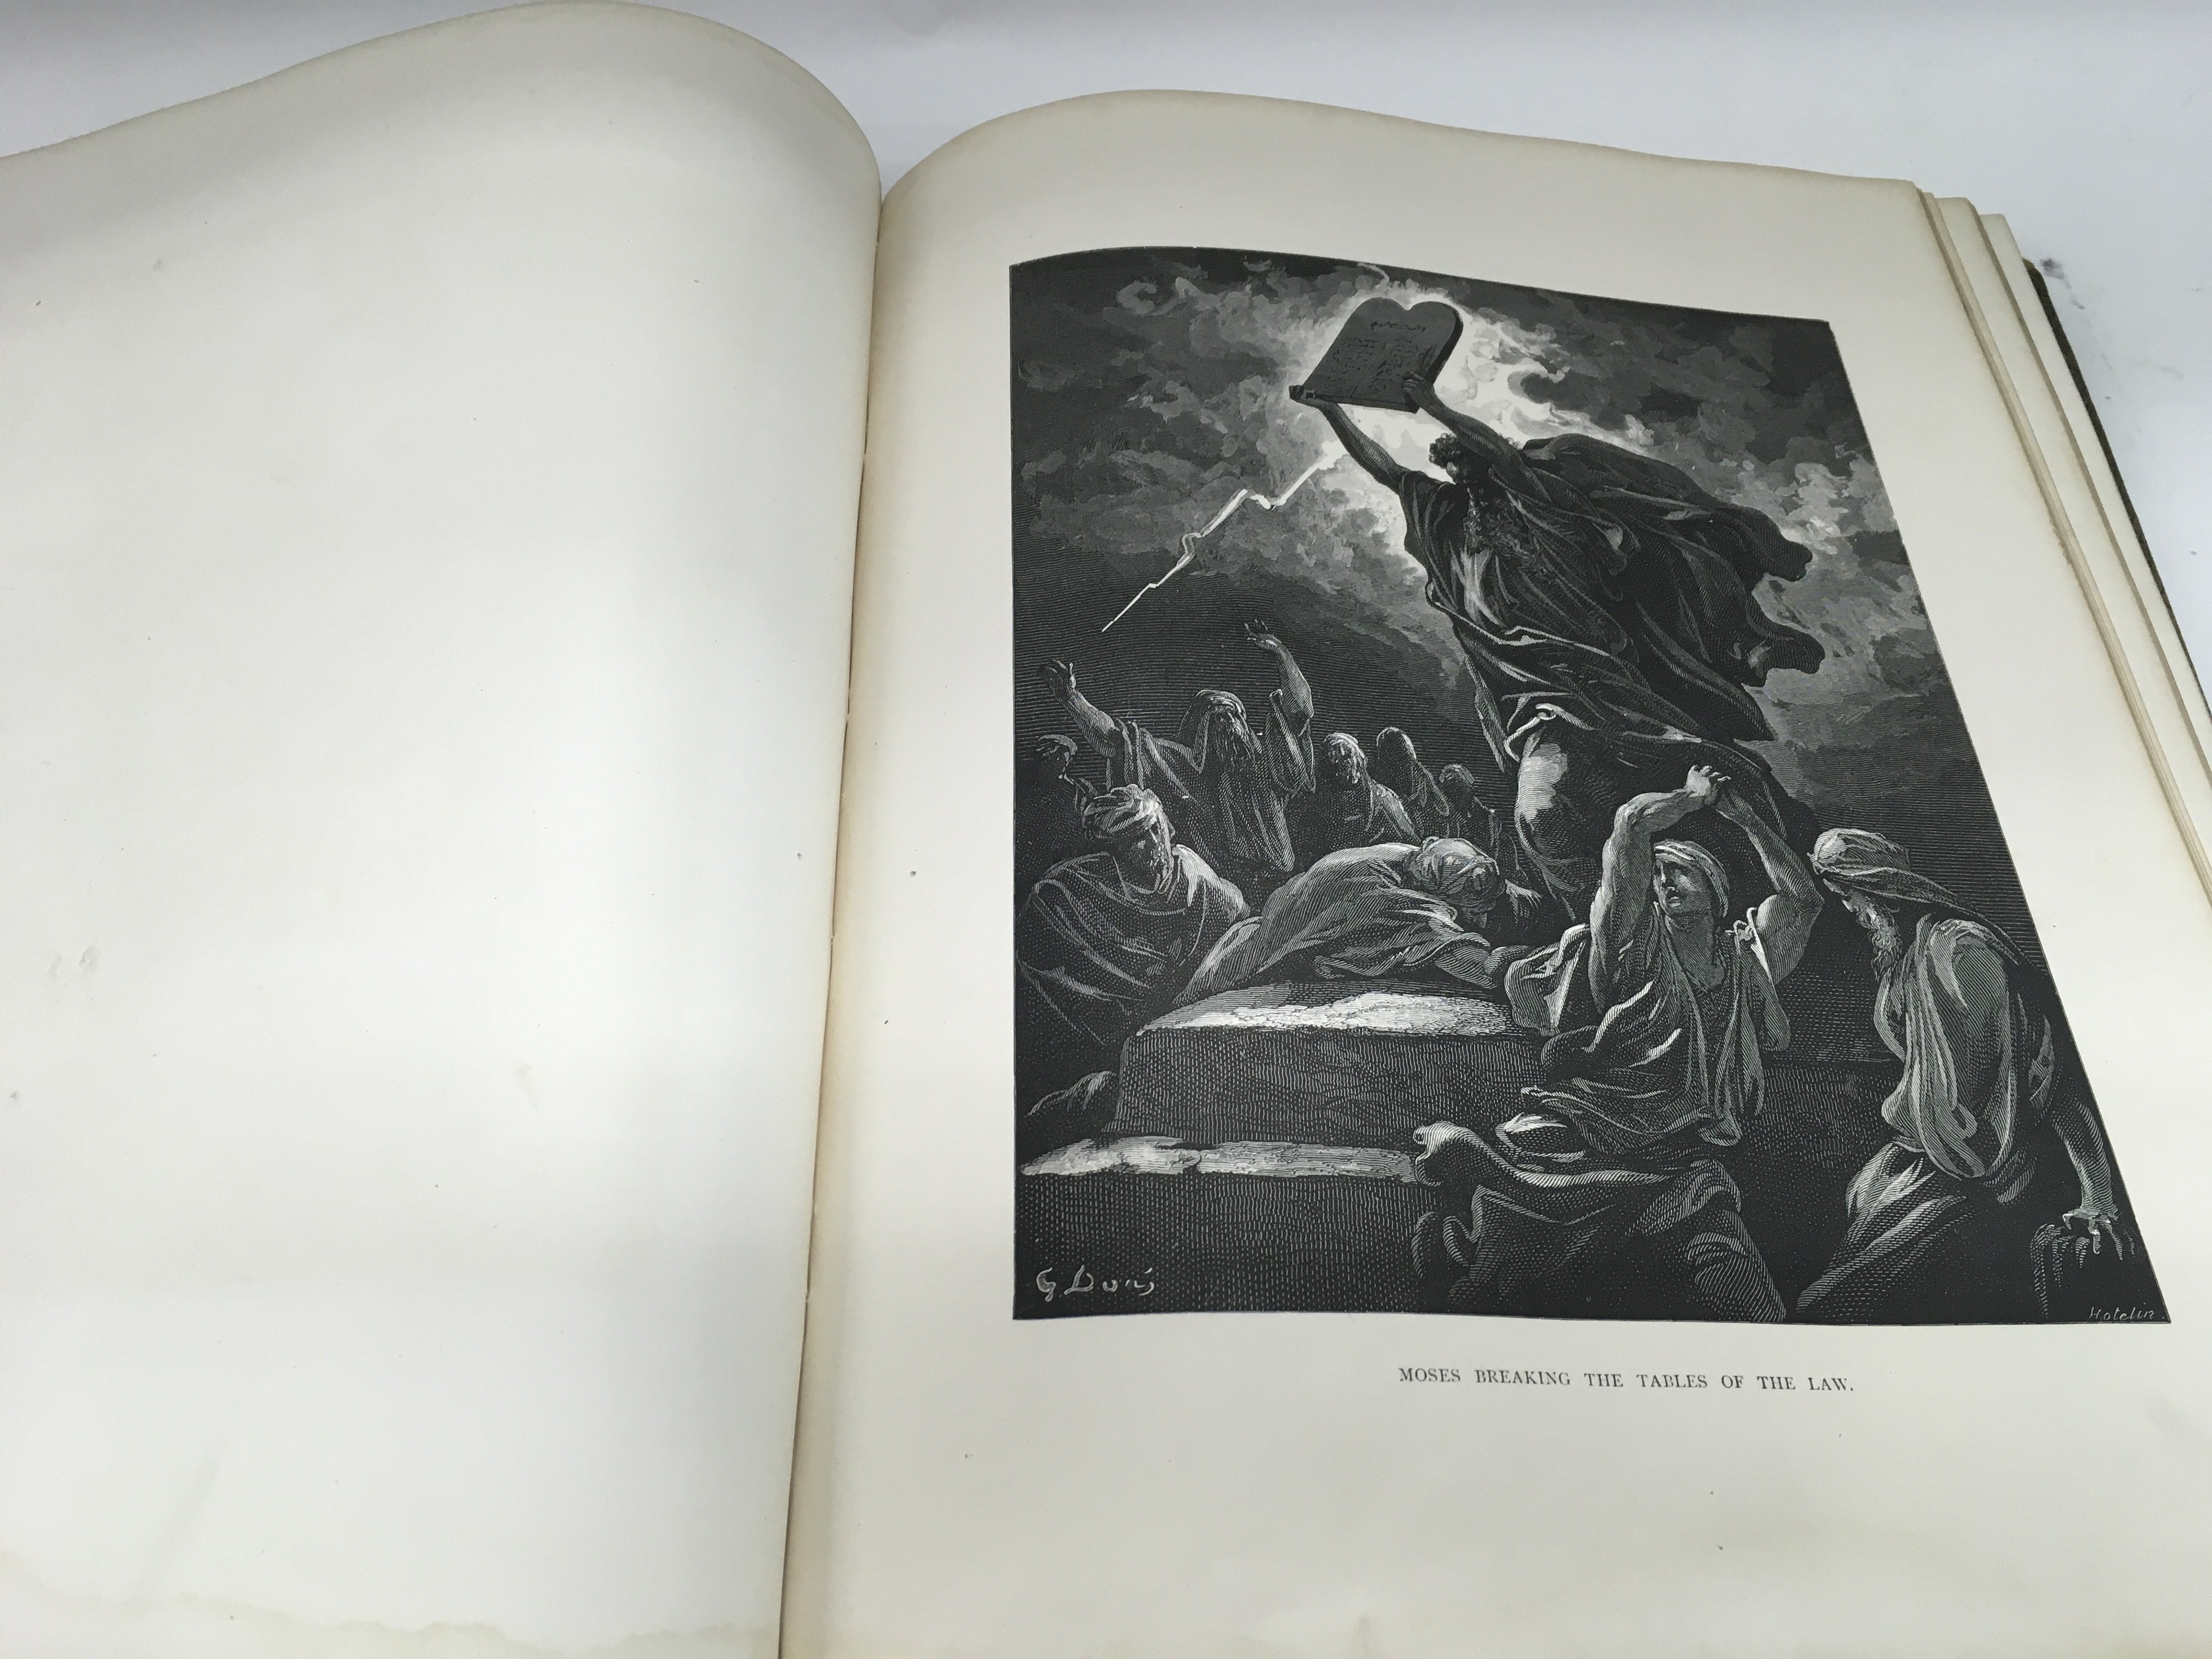 A Victorian book 'The Dore Gallery' containing 250 engravings and published by Cassell, Petter and - Image 4 of 4